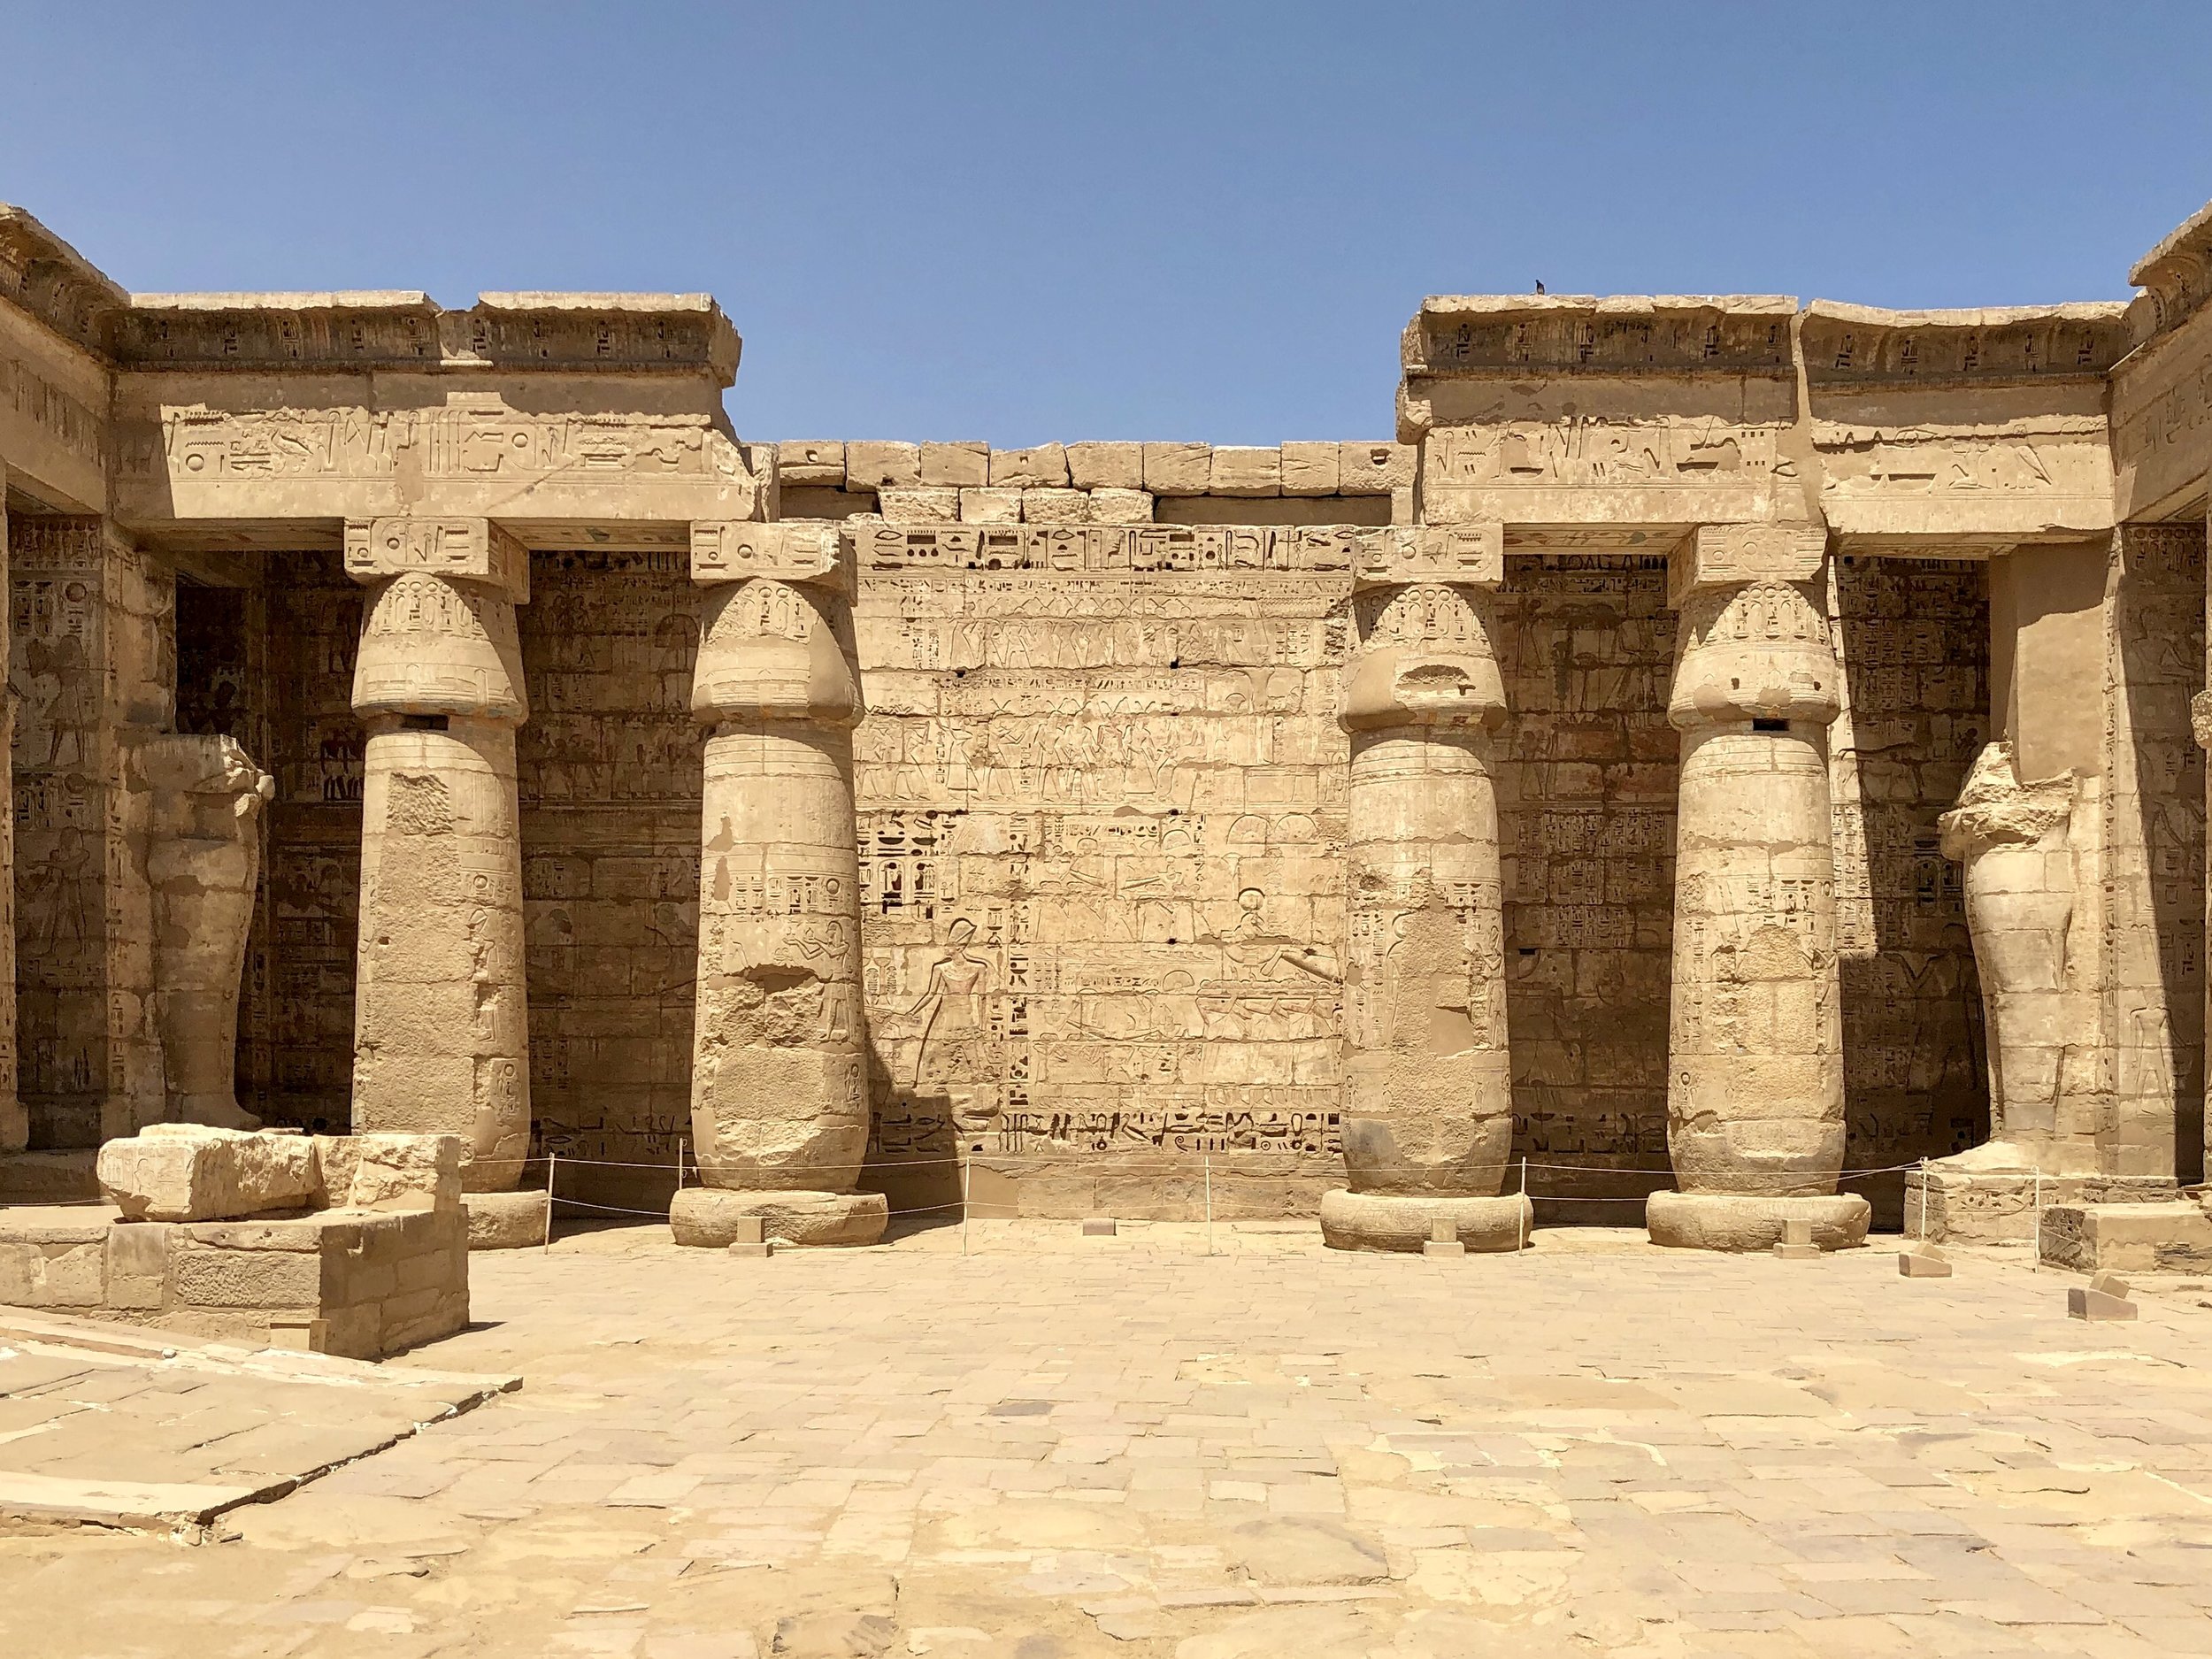 Like many other Ancient Egyptian temples, you proceed through a series of courtyards